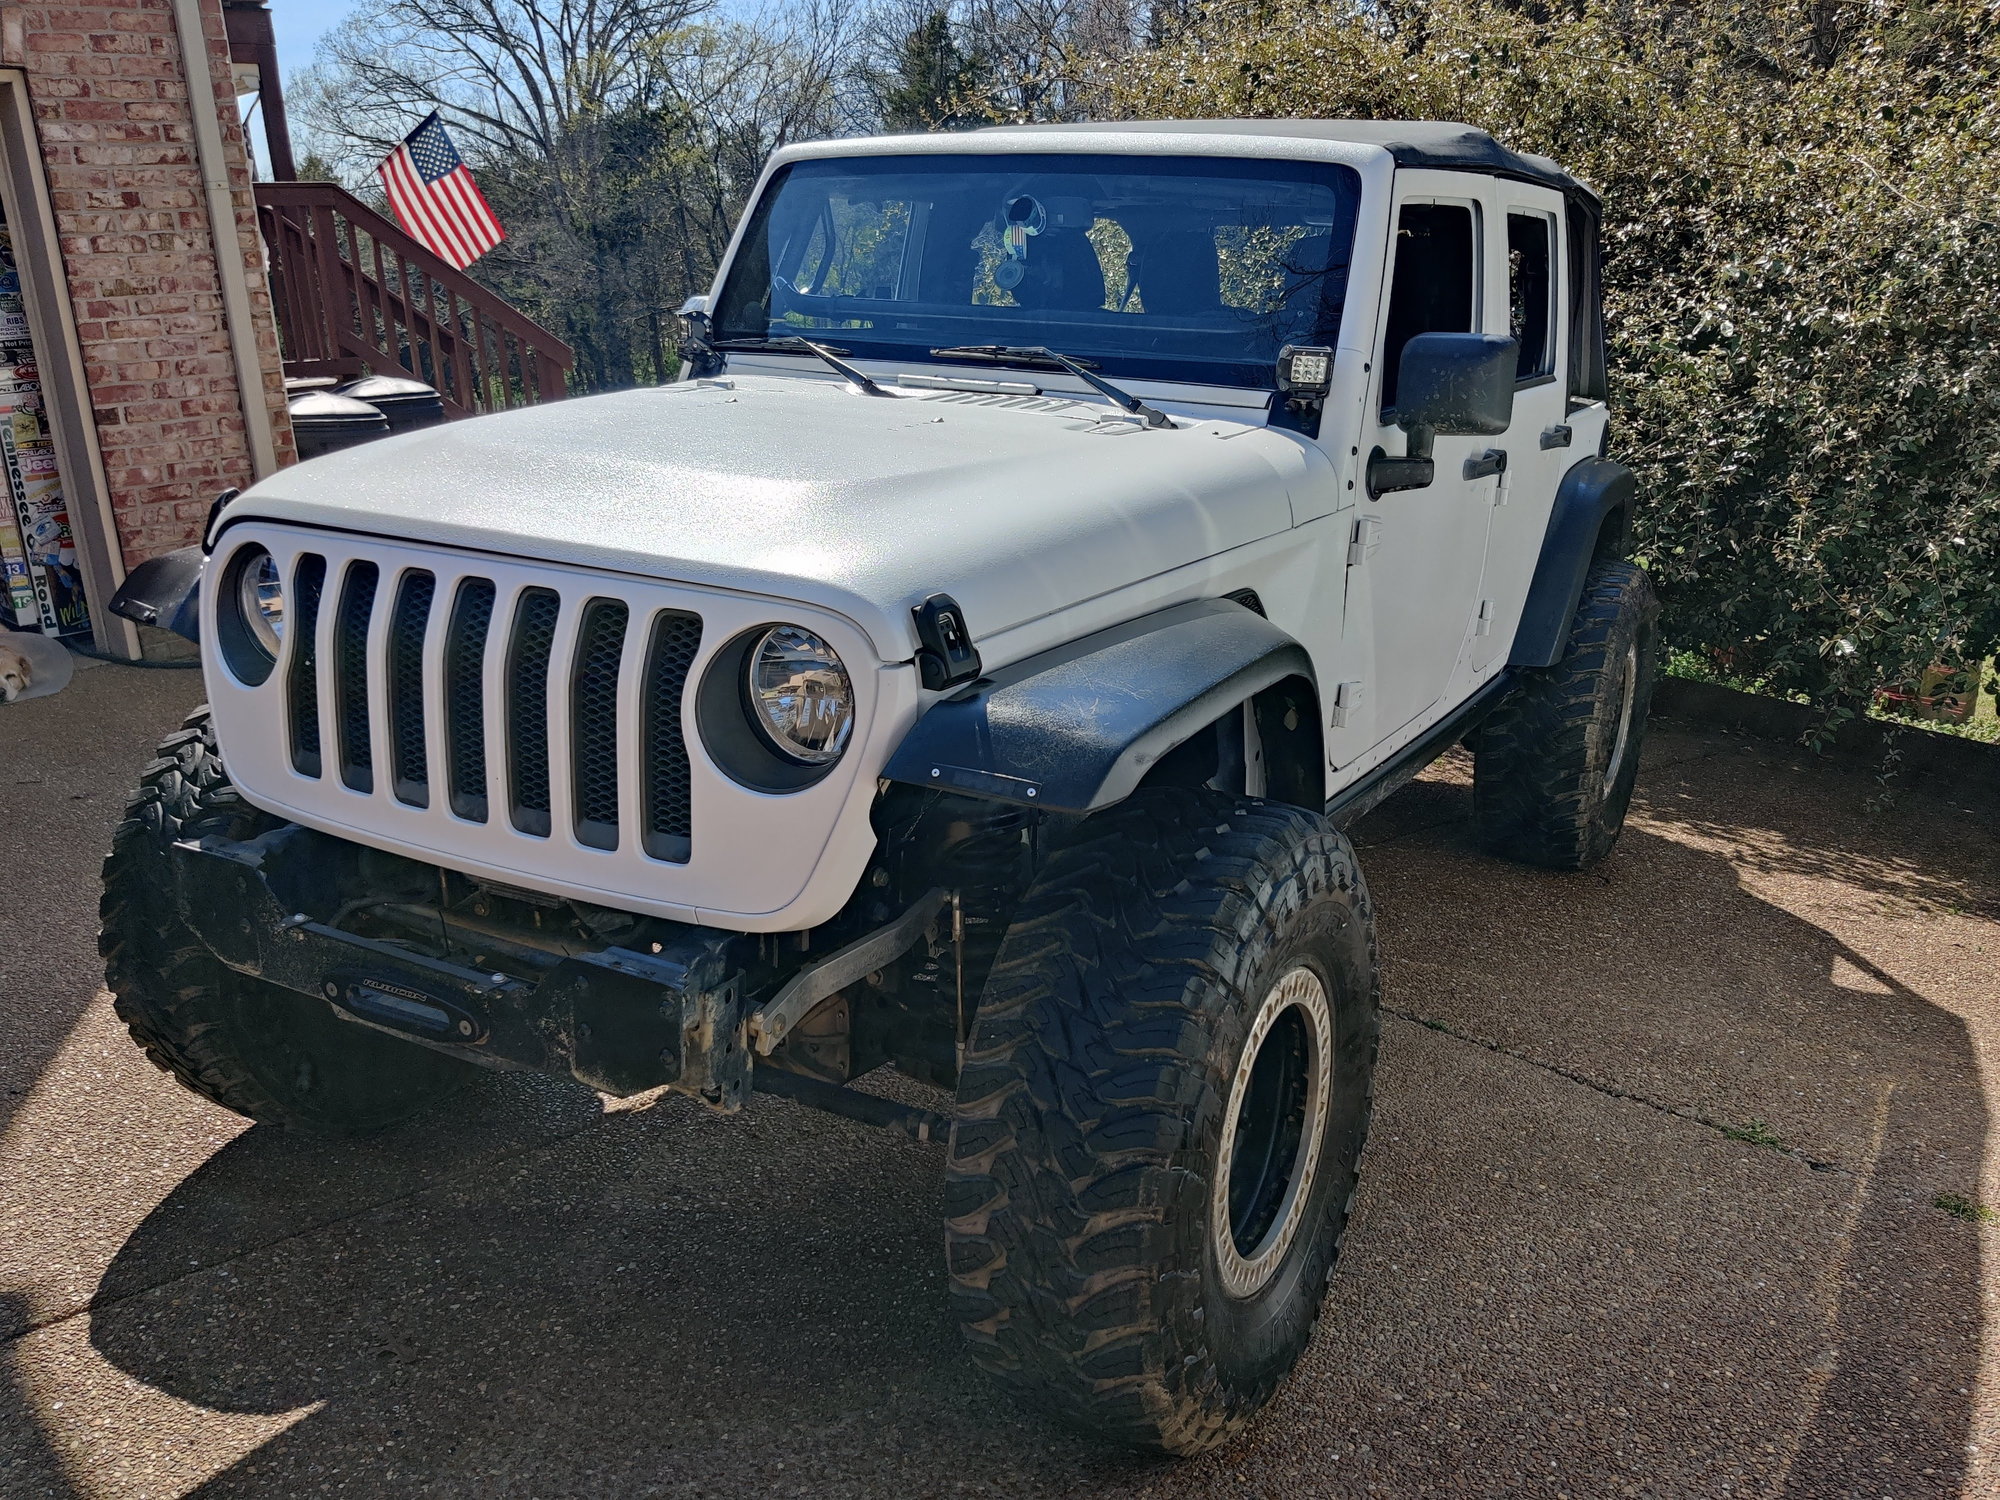 JL Front End Conversion  - The top destination for Jeep JK  and JL Wrangler news, rumors, and discussion